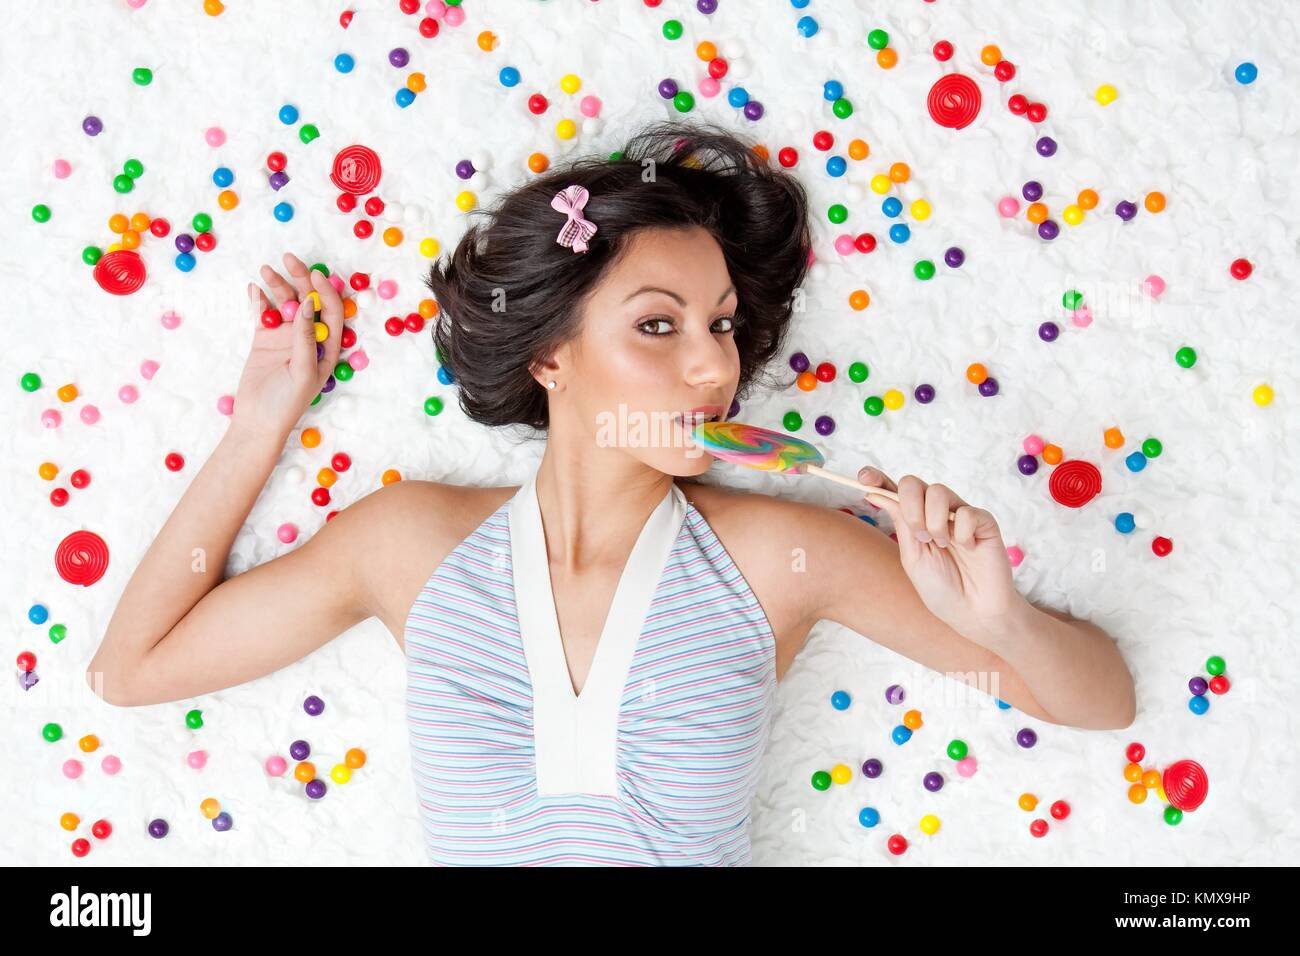 Young Latina woman laying on ruffled cloud like floor between colorful bubblegum balls eating a lollipop Stock Photo